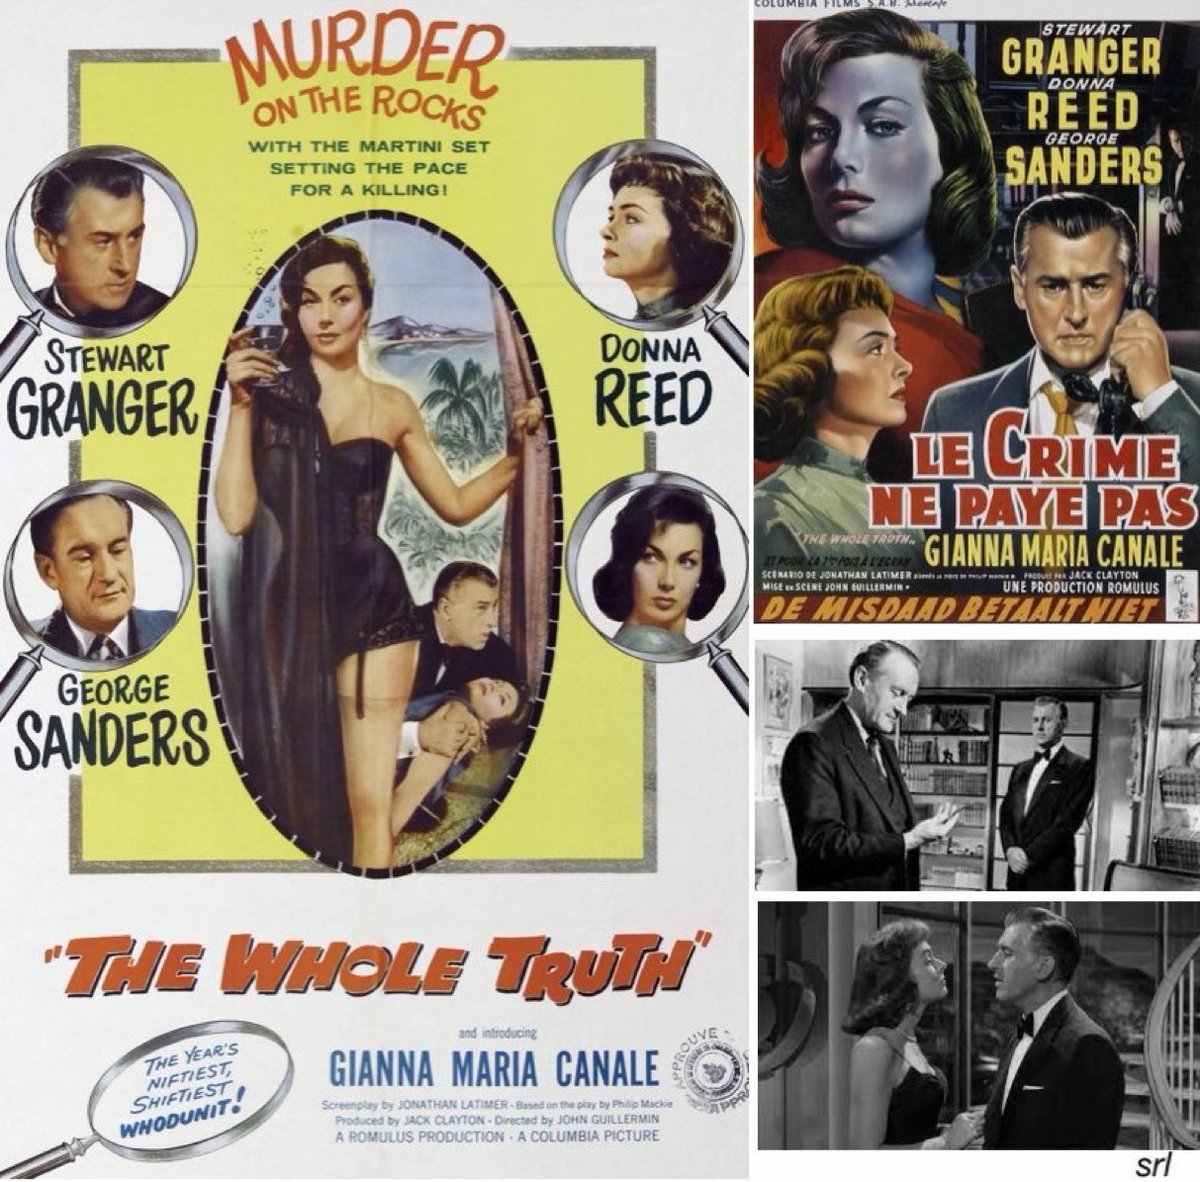 10:05pm TODAY on @TalkingPicsTV 

The 1958 #Crime film🎥 “The Whole Truth” directed by #JohnGuillermin & #DanCohen(uncredited) and written by #JonathanLatimer

Based on #PhilipMackie’s 1955 #BBC TV📺 play🎭

🌟#StewartGranger #DonnaReed #GeorgeSanders #GiannaMariaCanale